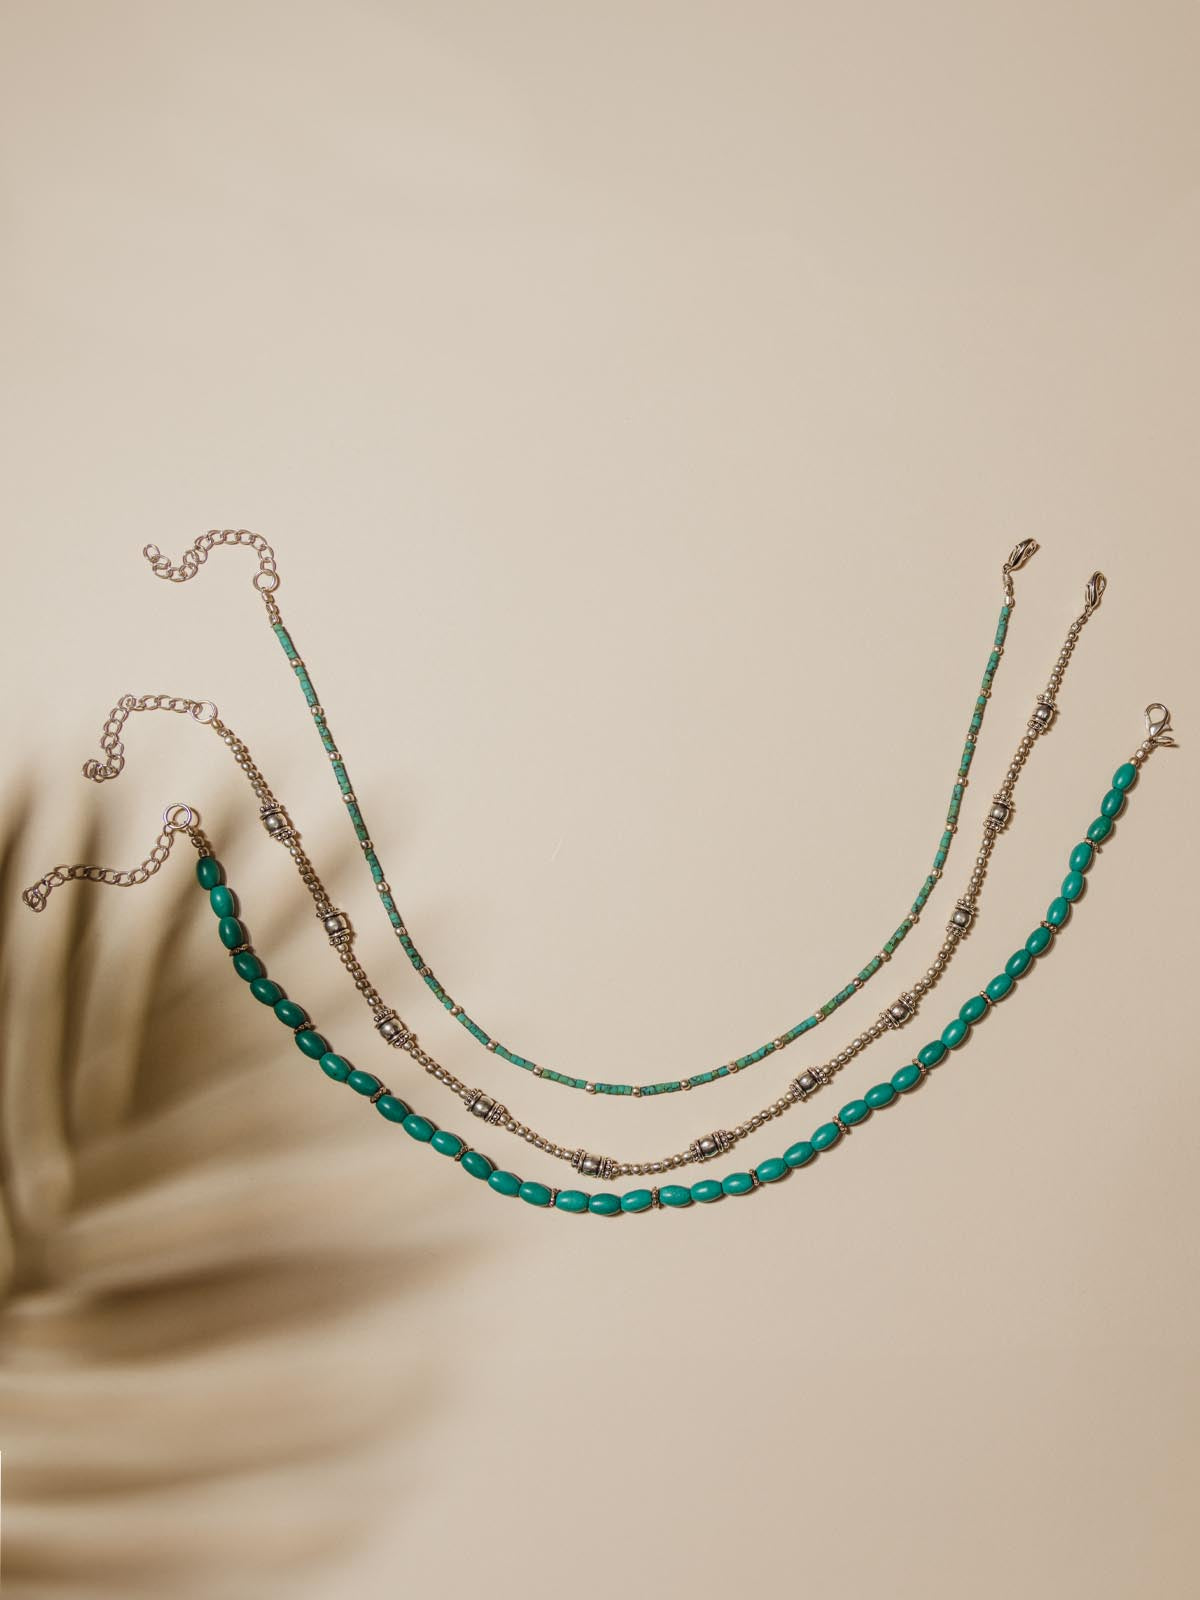 Set of | Joffa and Necklaces 3 – Silver Turquoise Layering Joffa Marketplace